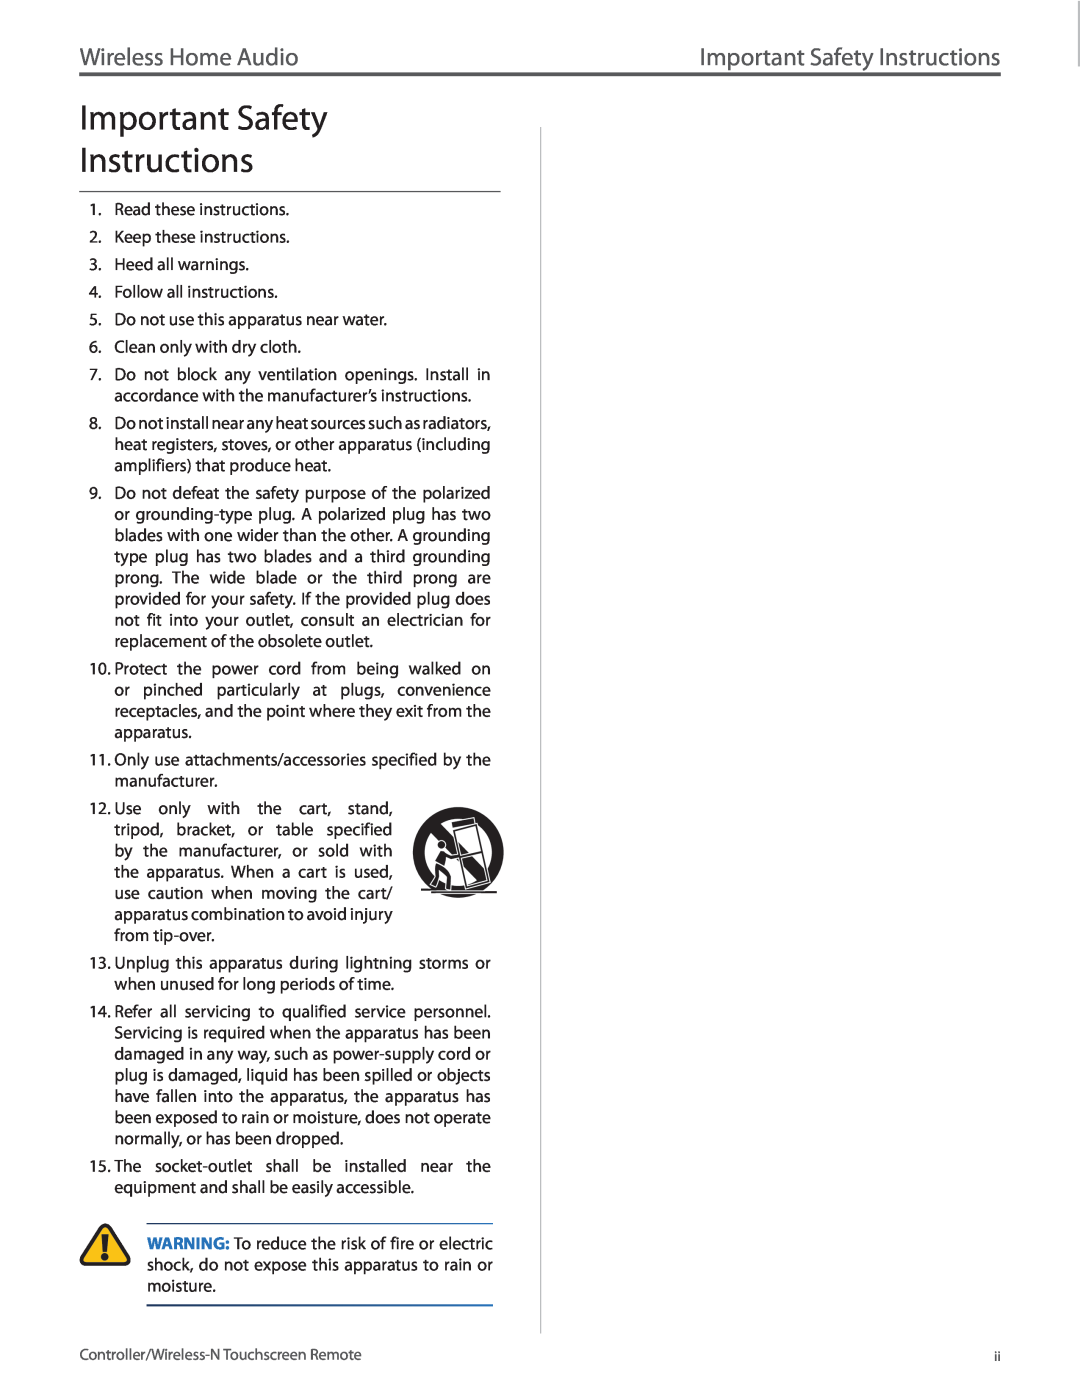 Linksys DMRW1000 manual Important Safety Instructions, Wireless Home Audio 